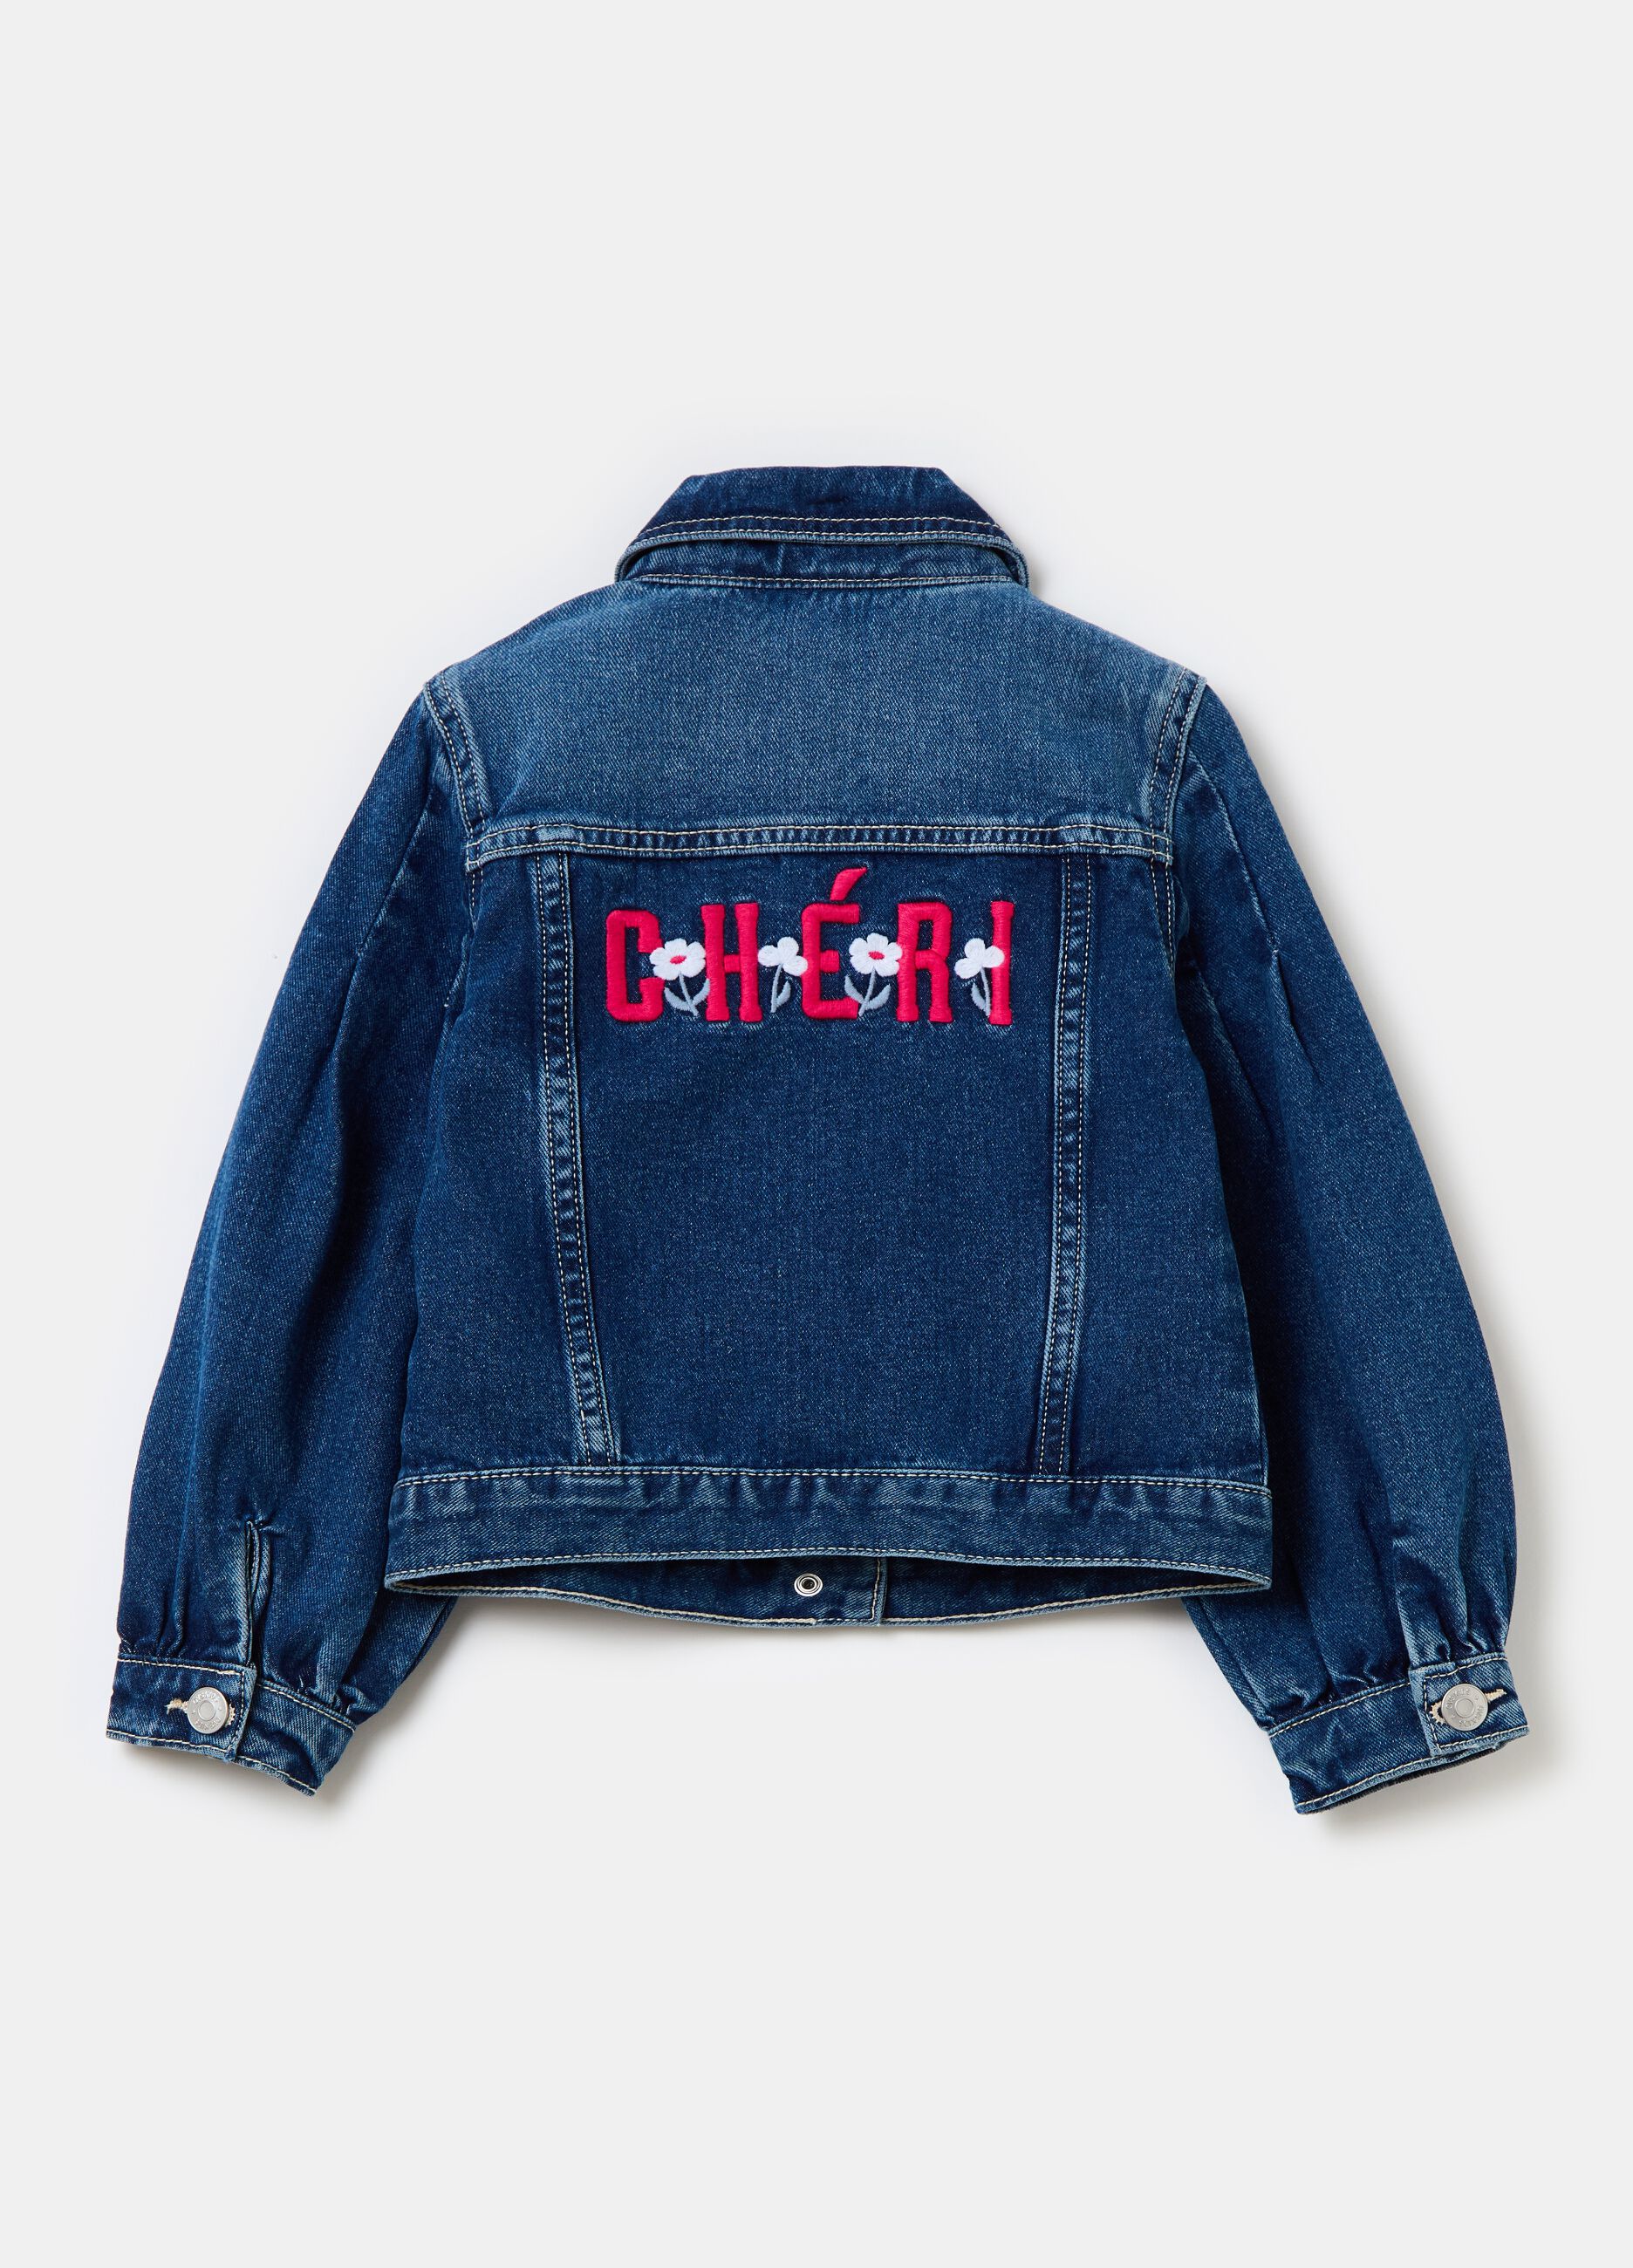 Denim jacket with lettering embroidery